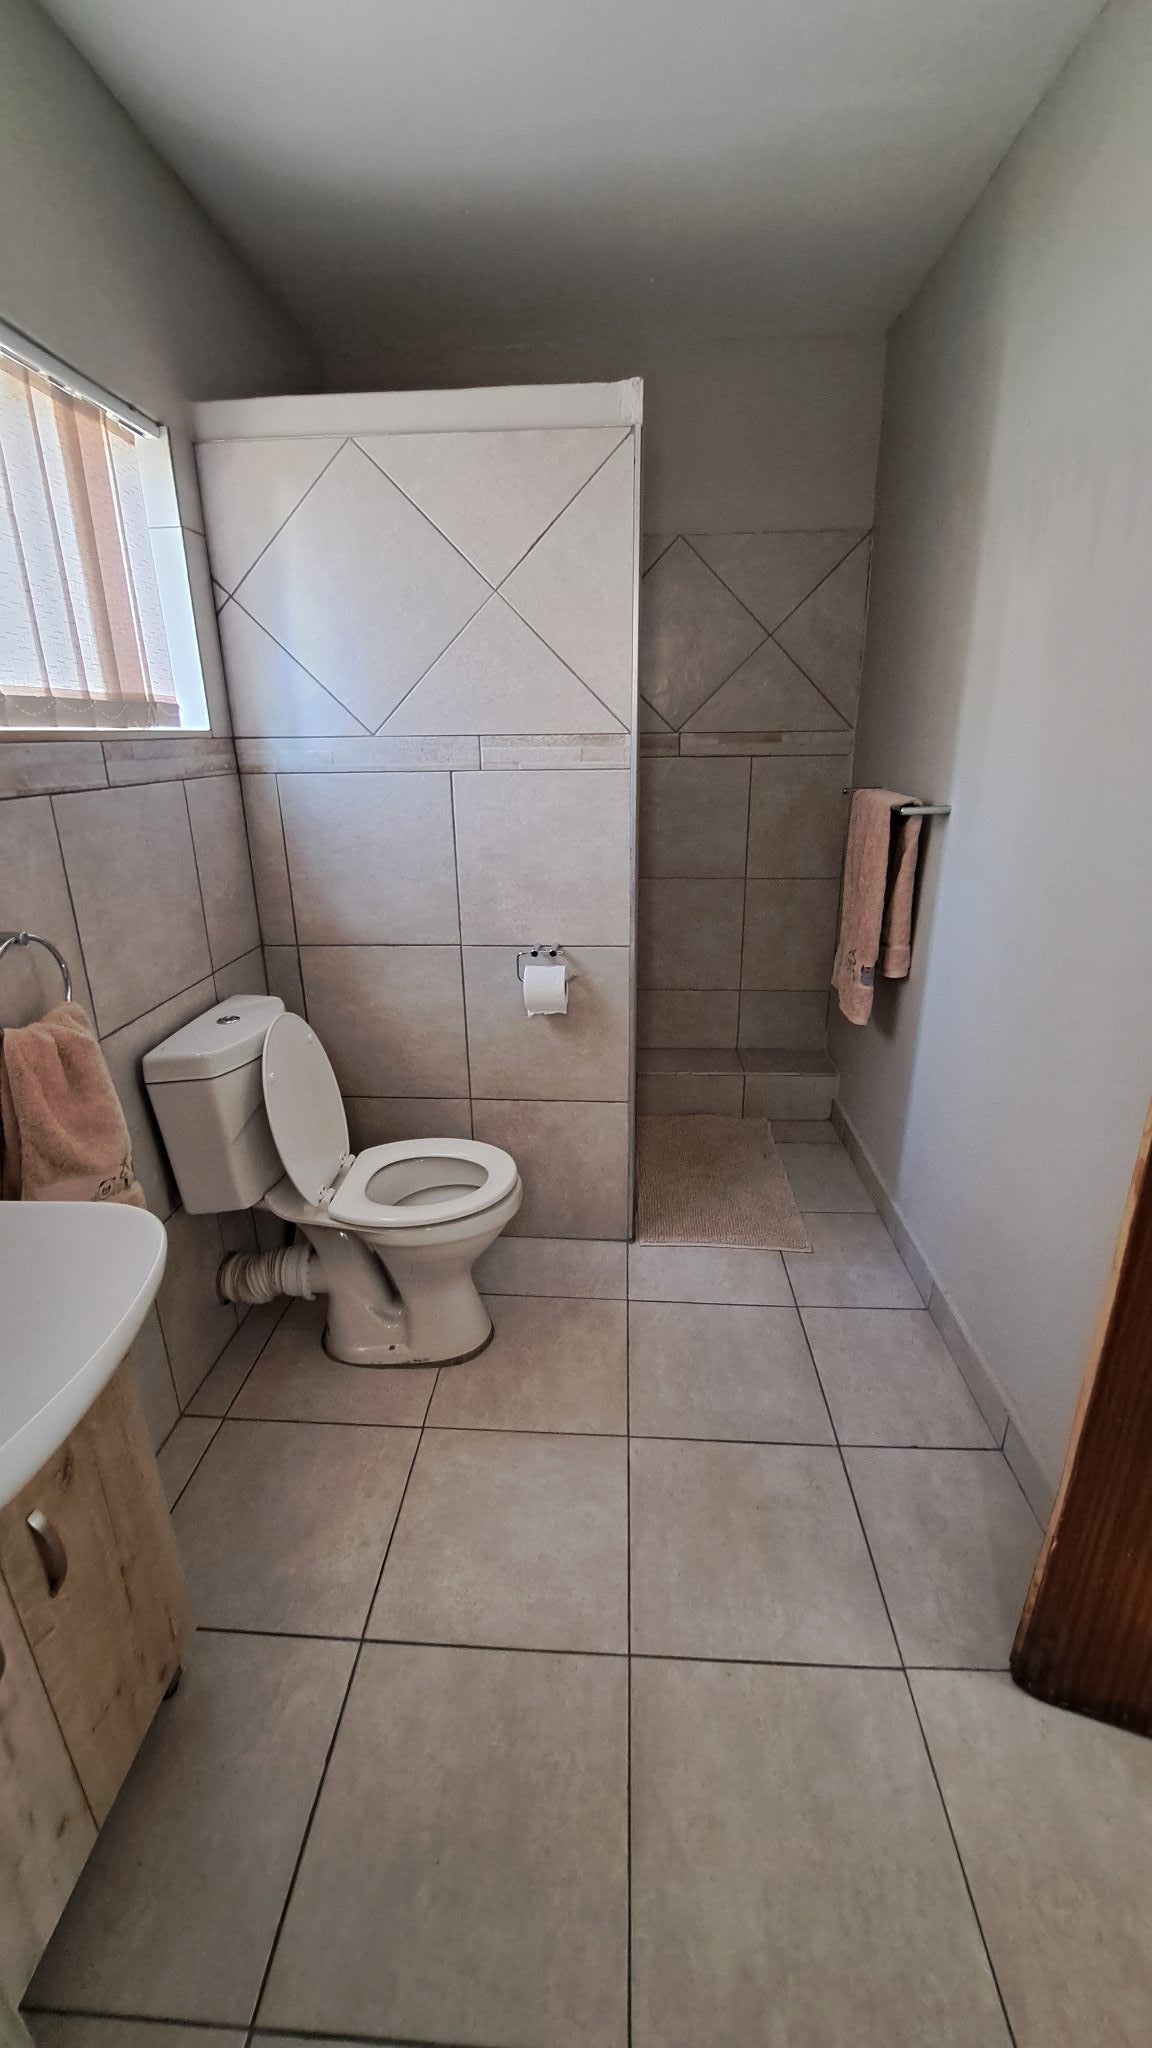 9 On Feijoa Nelspruit Mpumalanga South Africa Unsaturated, Bathroom